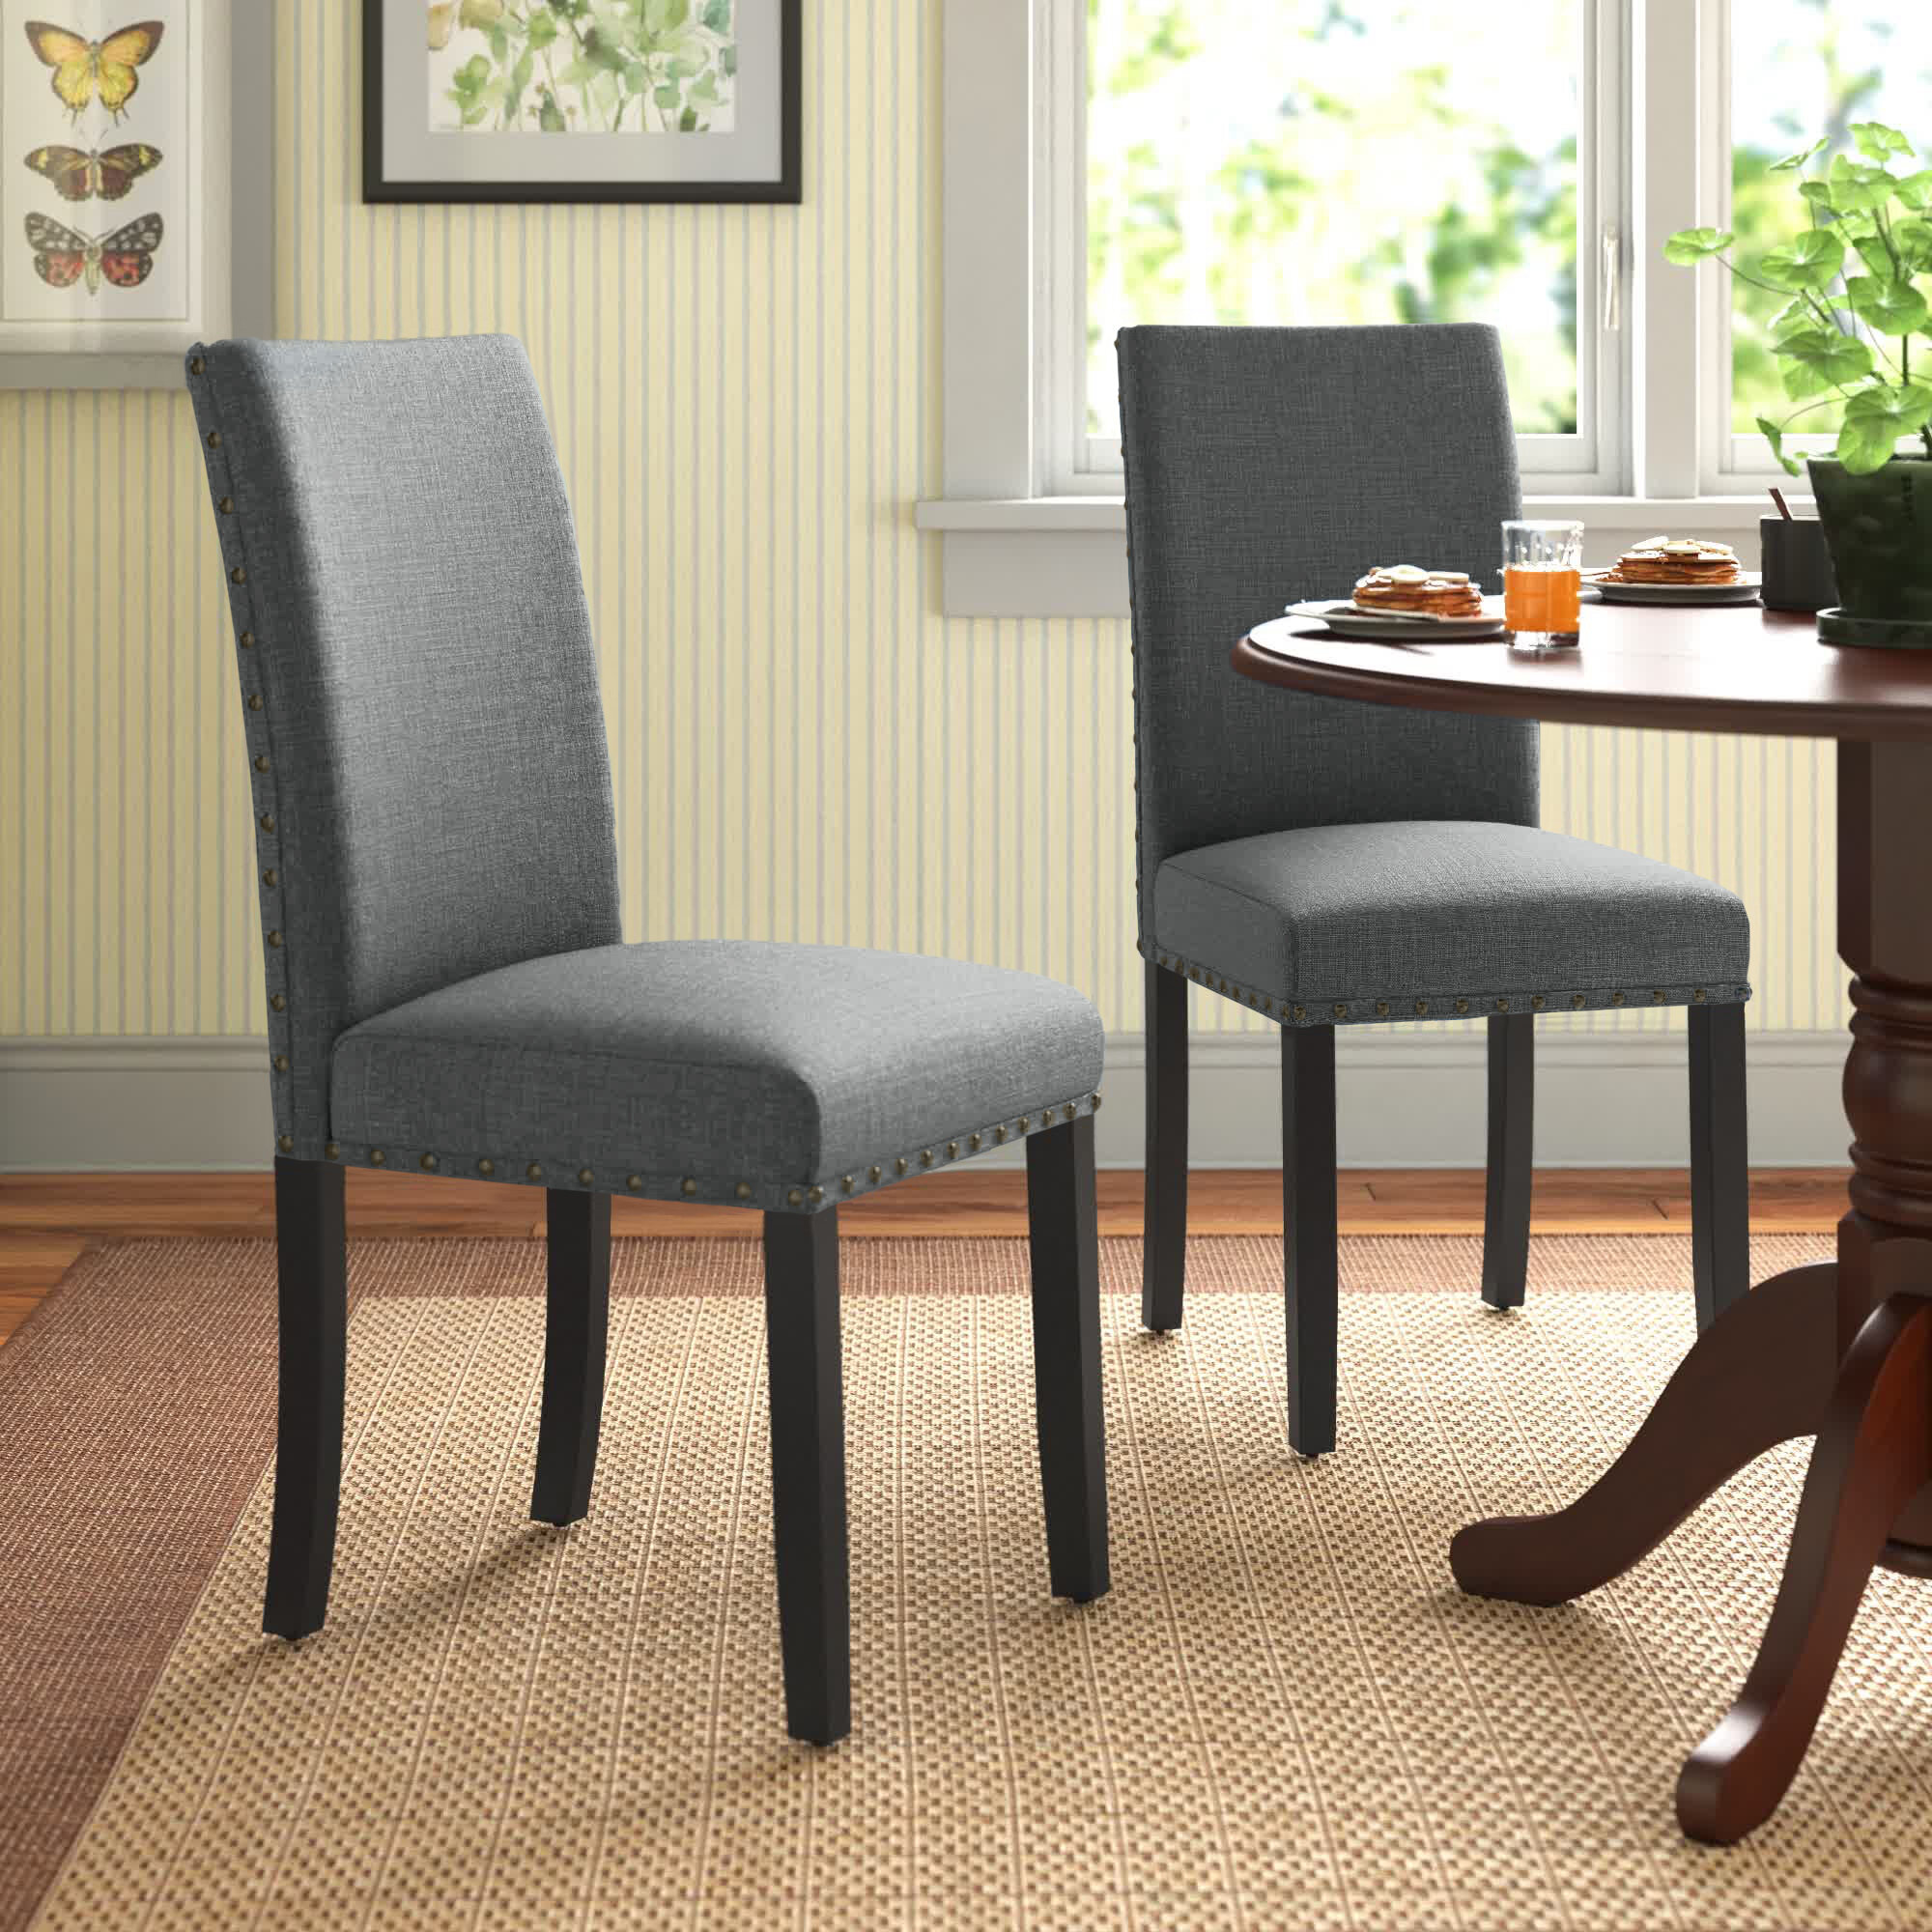 Andover Mills™ Bookout Tufted Upholstered Wooden Dining Chairs & Reviews